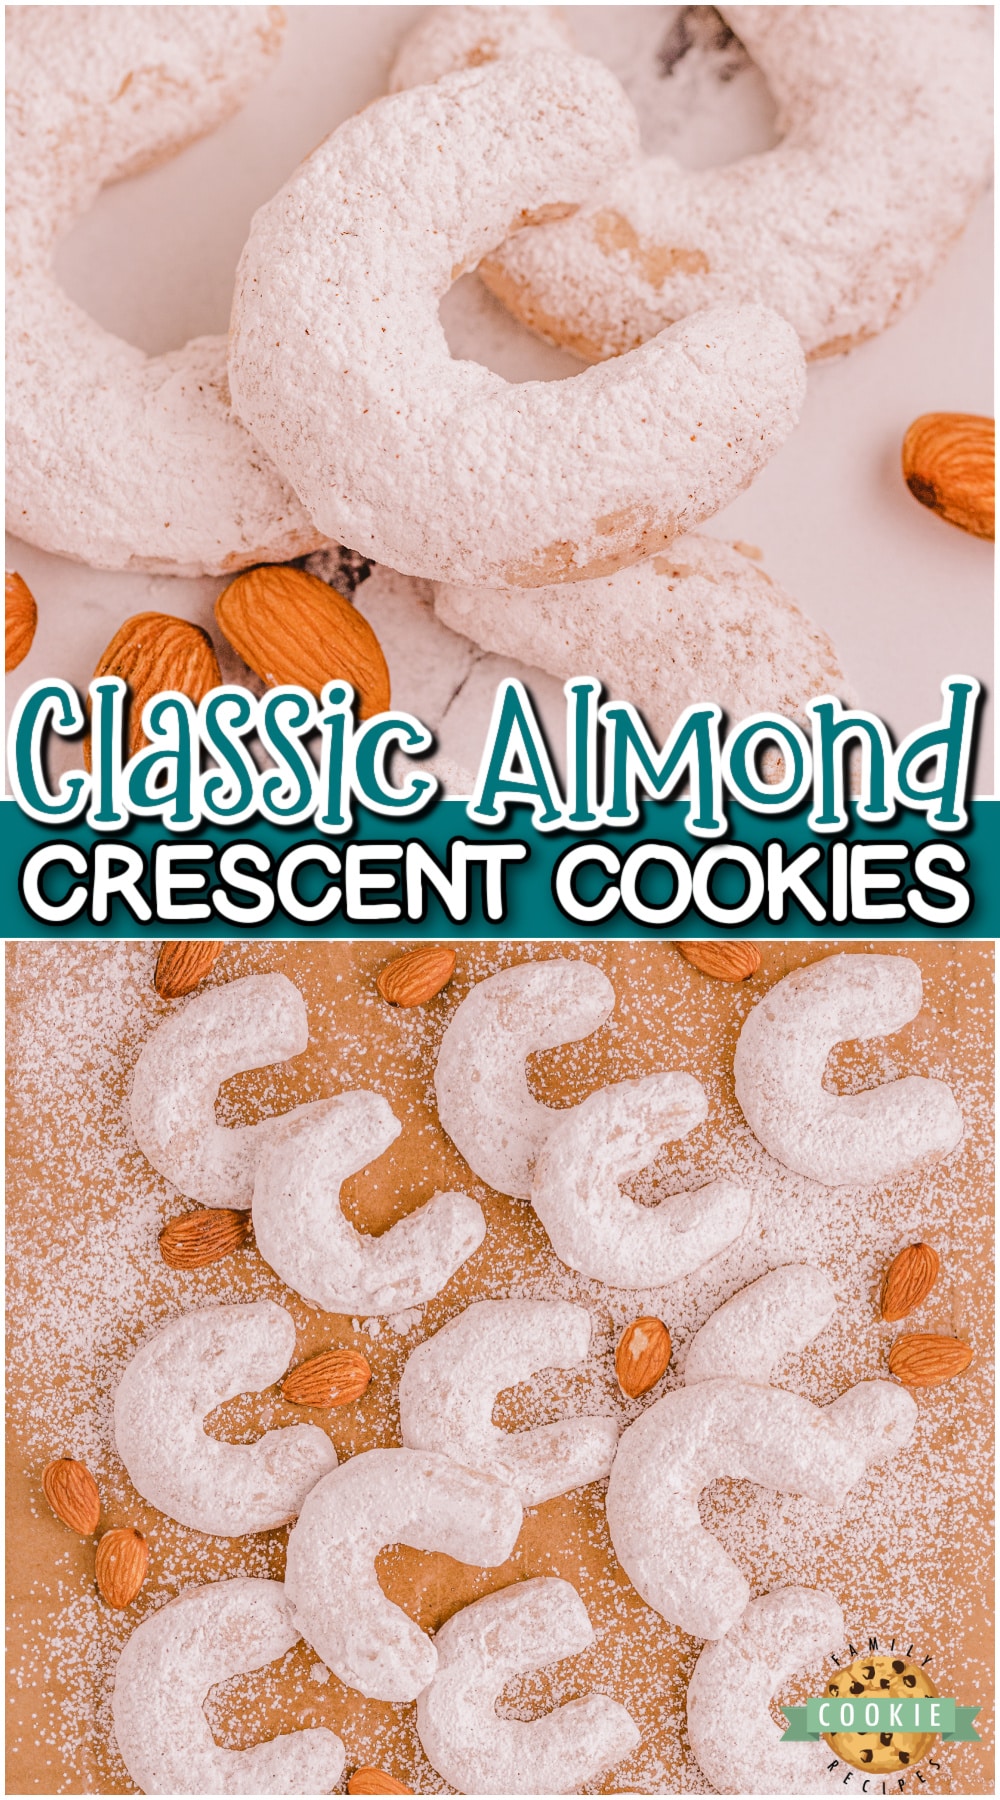 Almond cinnamon crescent cookies are classic buttery shortbread cookies shaped into crescents & rolled in powdered sugar. Perfect cookies beside a cup of tea in cold winter weather! via @buttergirls